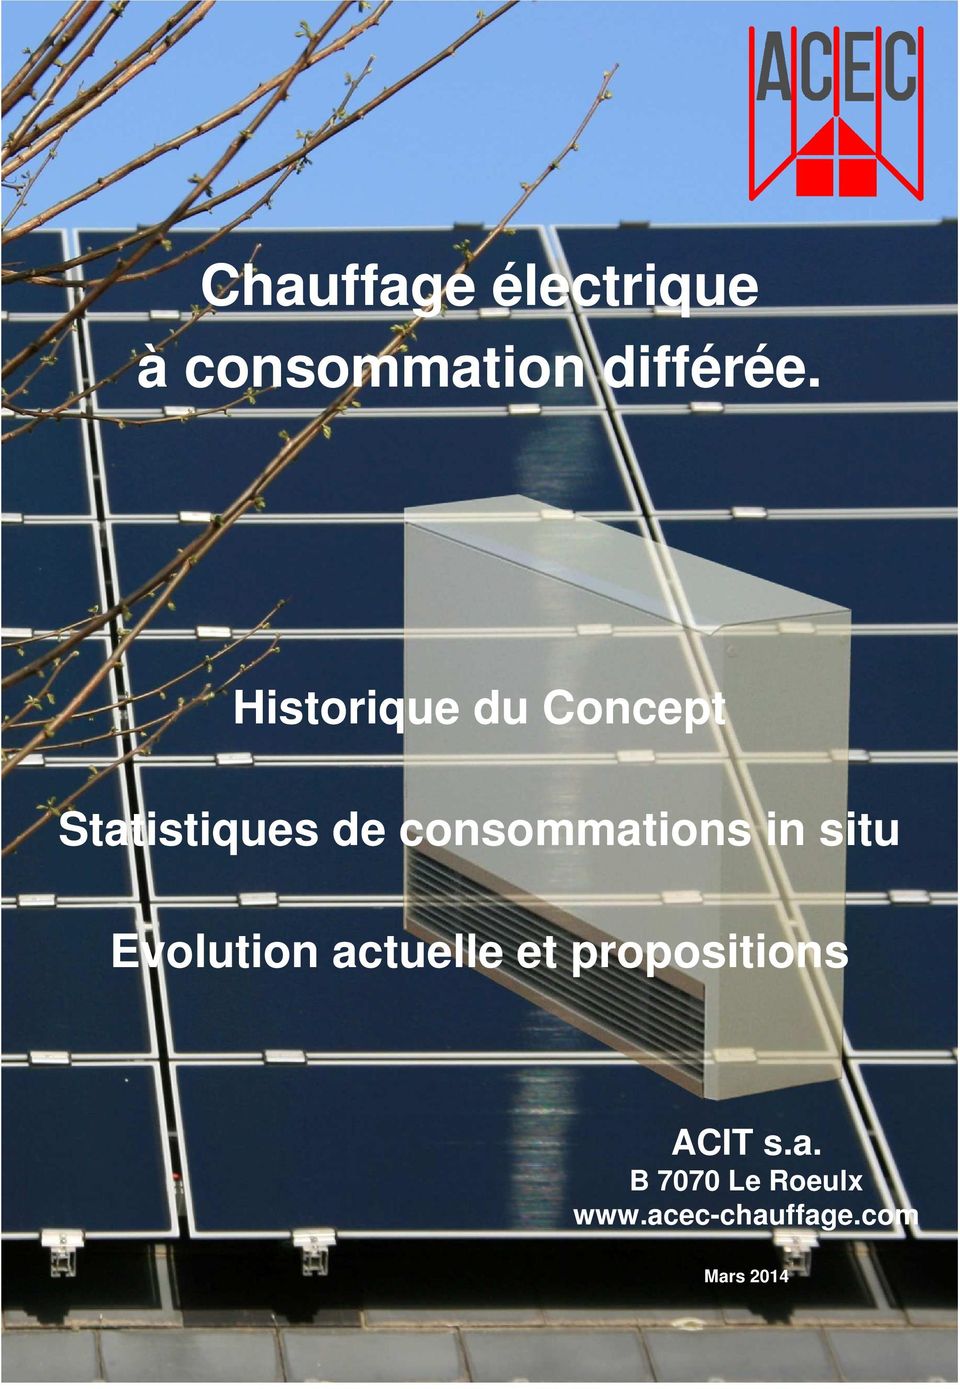 consommations in situ Evolution actuelle et